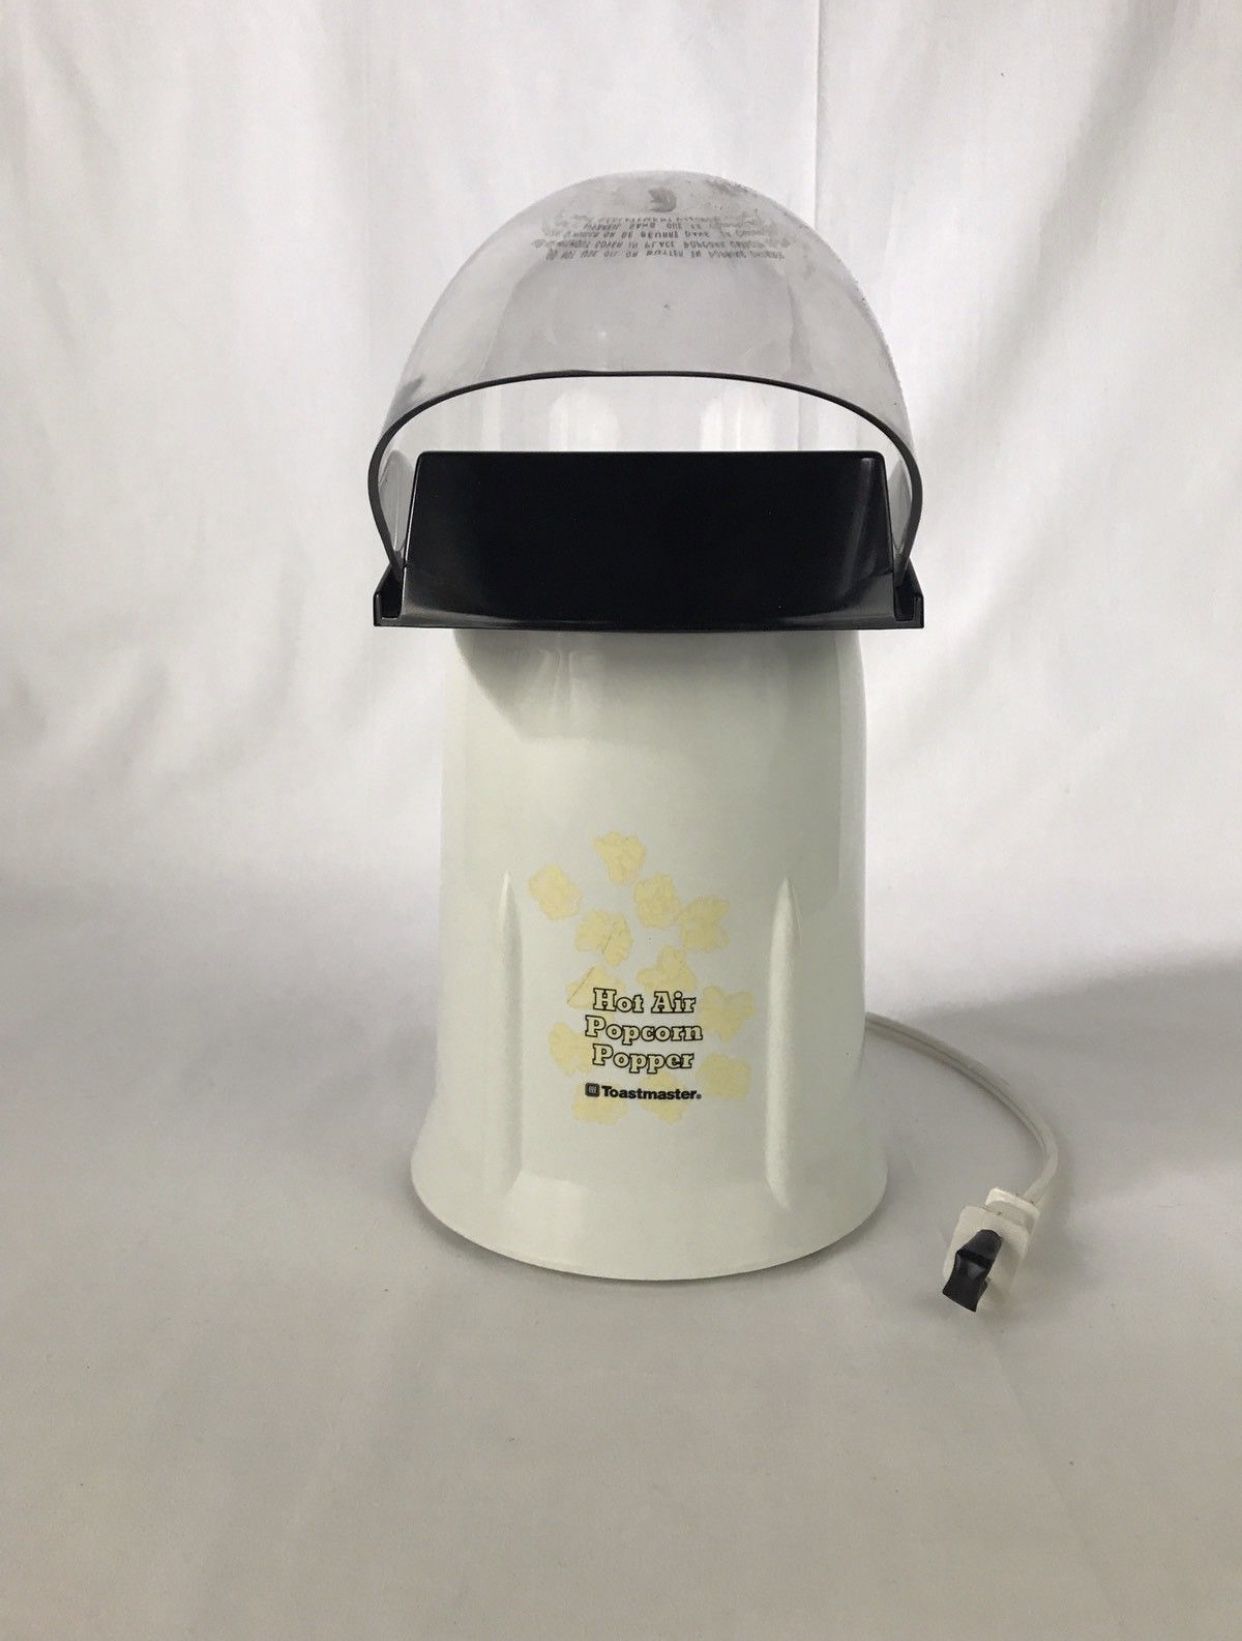 NEW NEVER USED: Toastmaster Hot Air Popcorn Popper